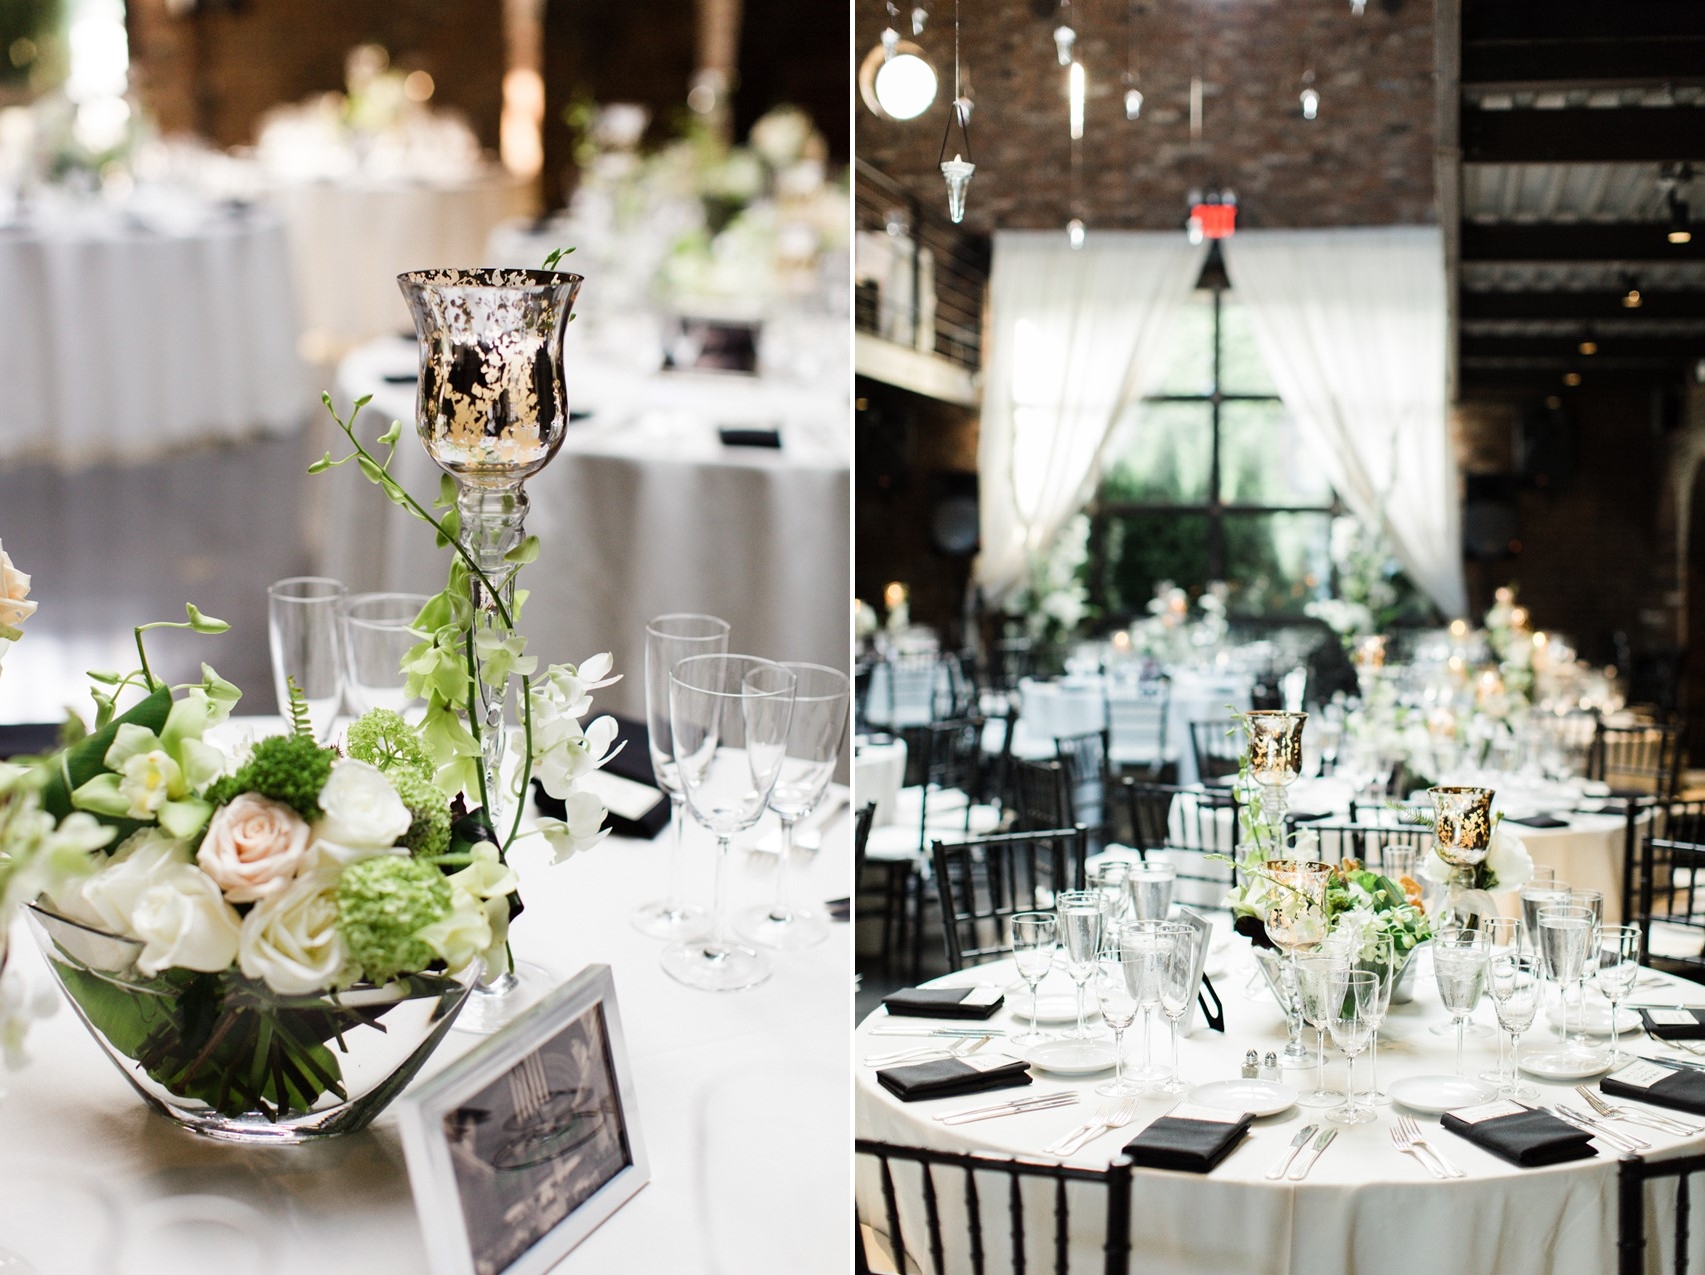 Wedding Centrepieces - A Vintage Inspired City Wedding in a Crisp and Elegant Palette of Ivory, Black & Green